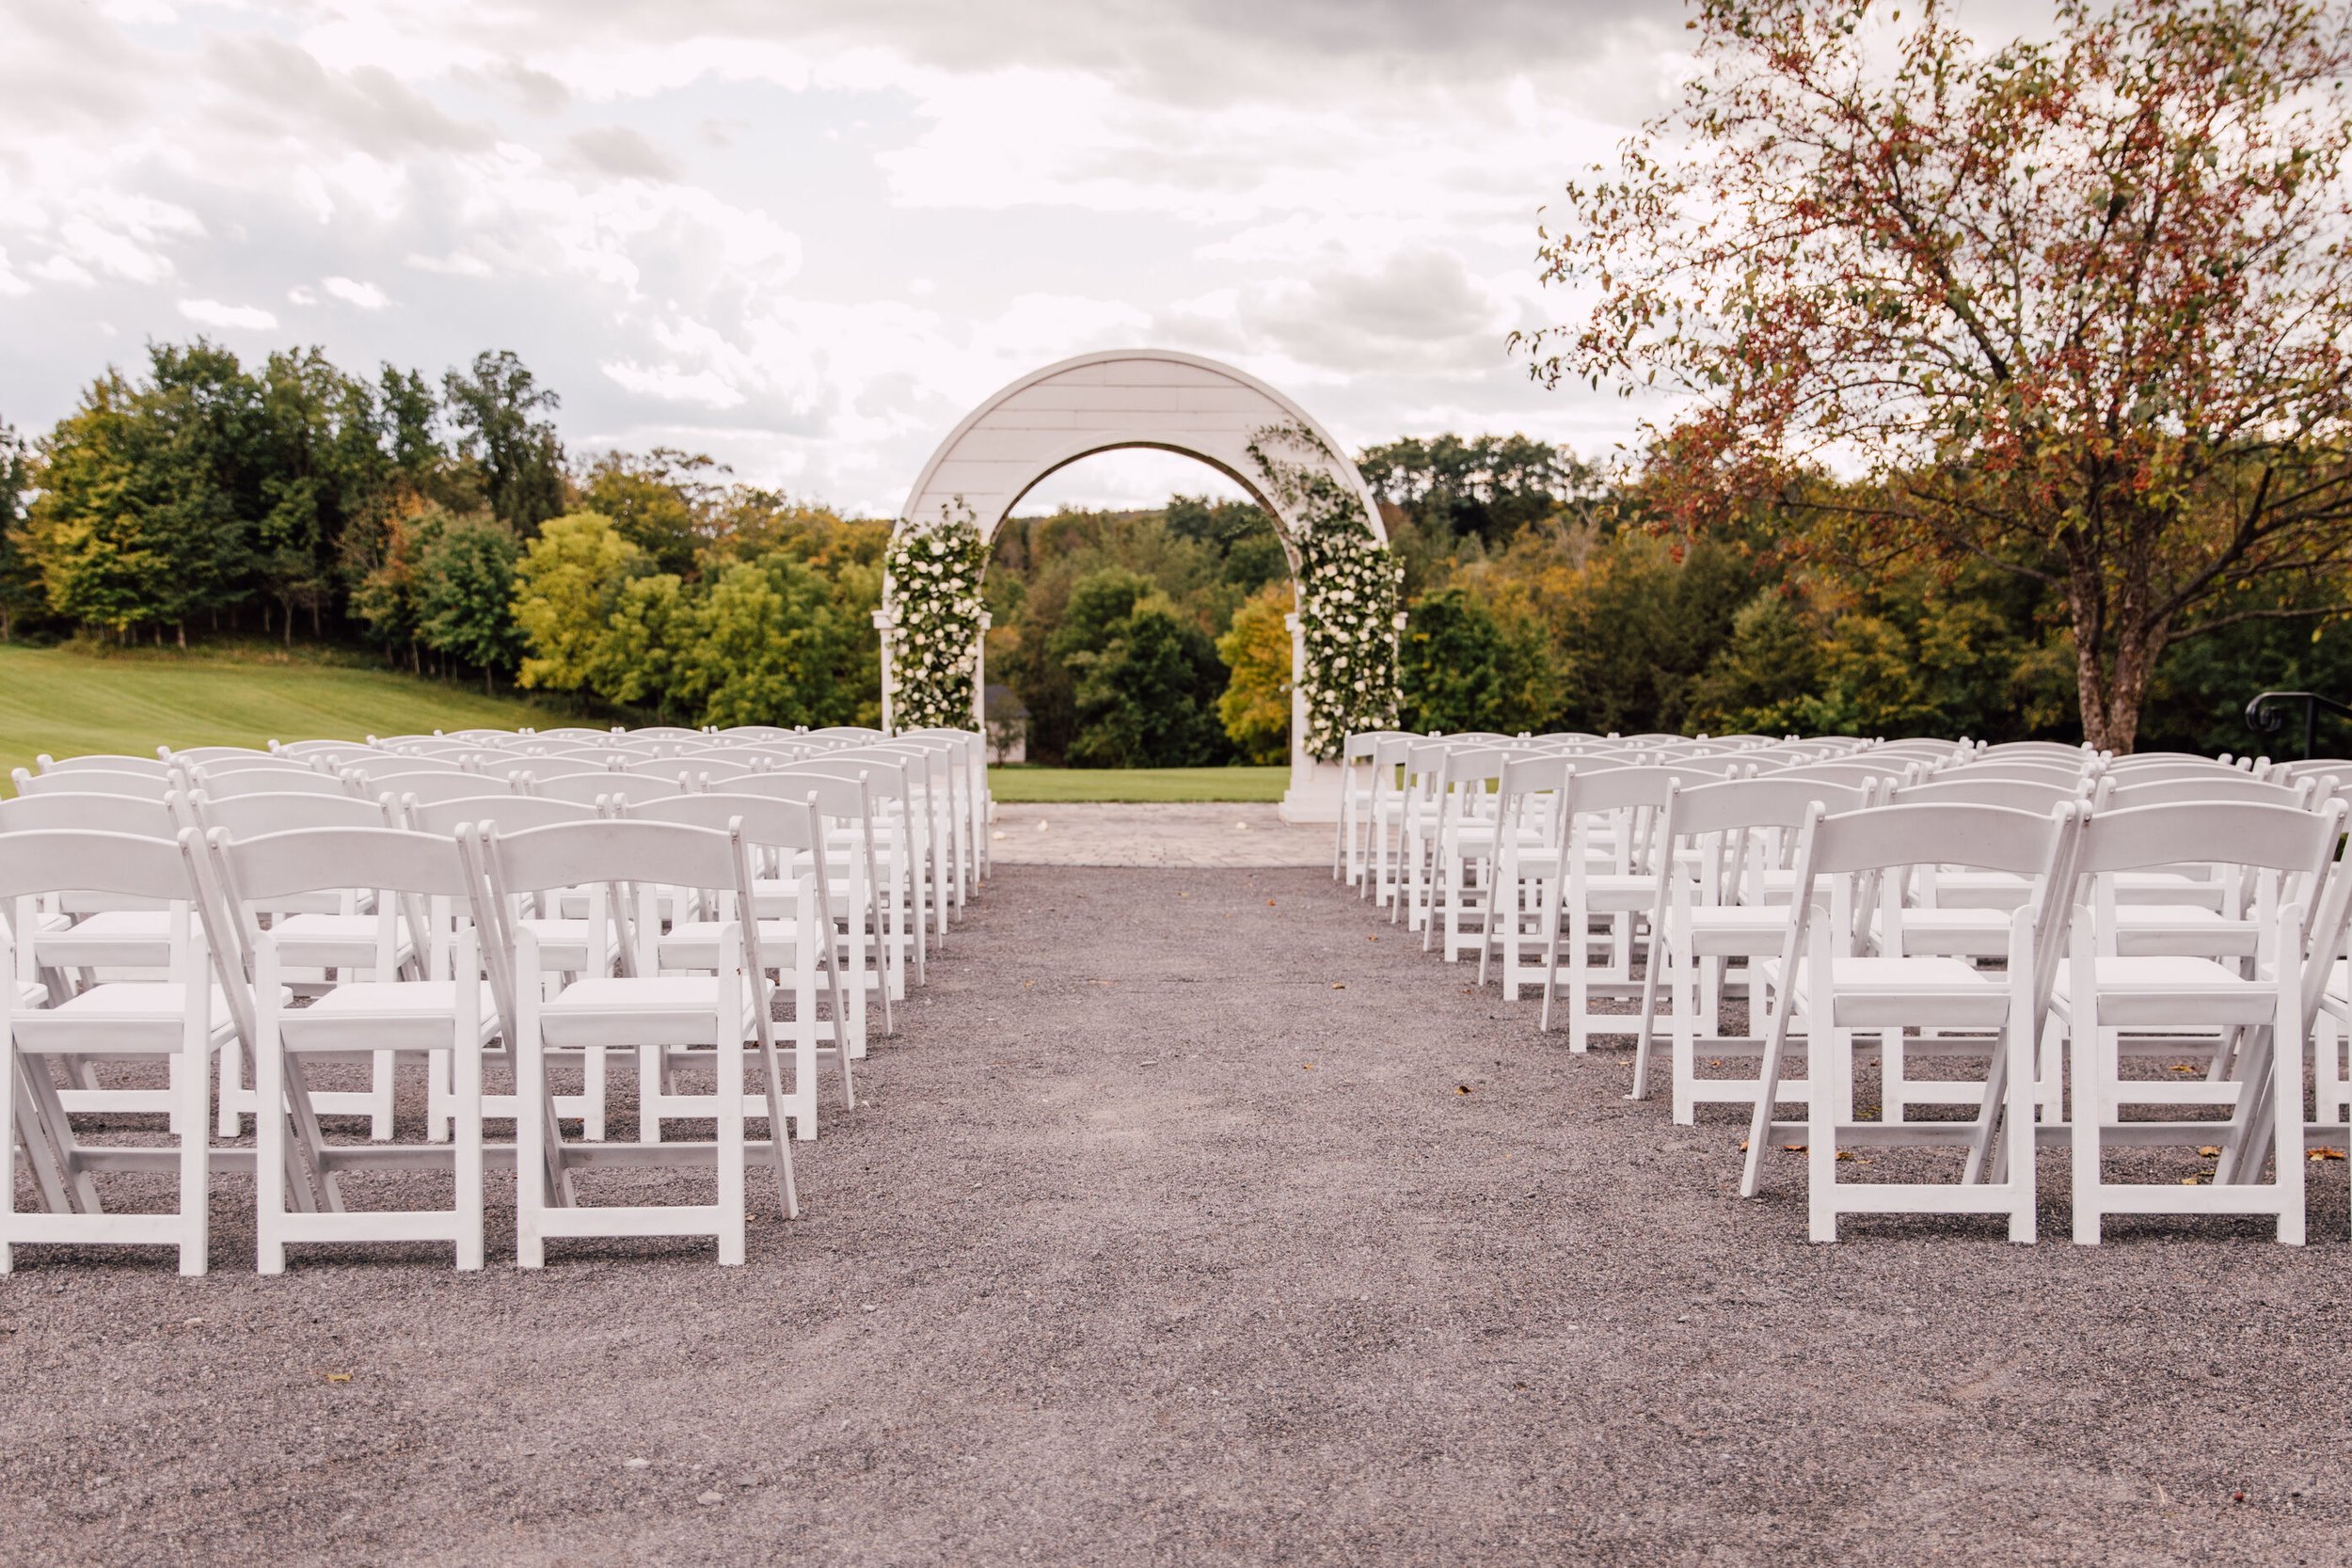  The wood wedding arch at hayloft on the arch stands in front of chairs for the wedding guests on a bright an clear day 